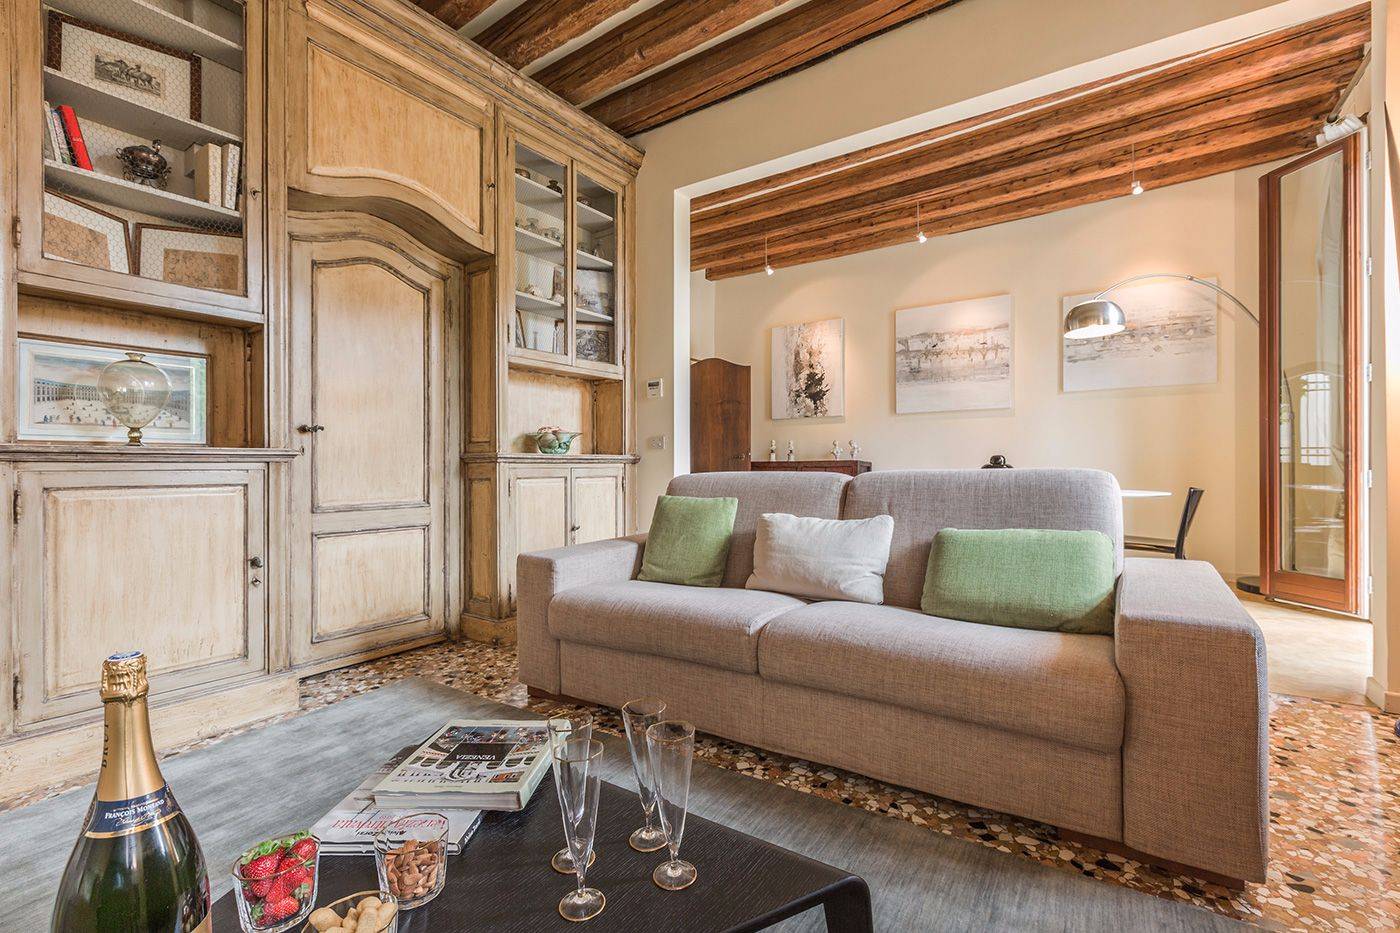 the welcoming living room features a rich boiserie and wooden beamed ceiling